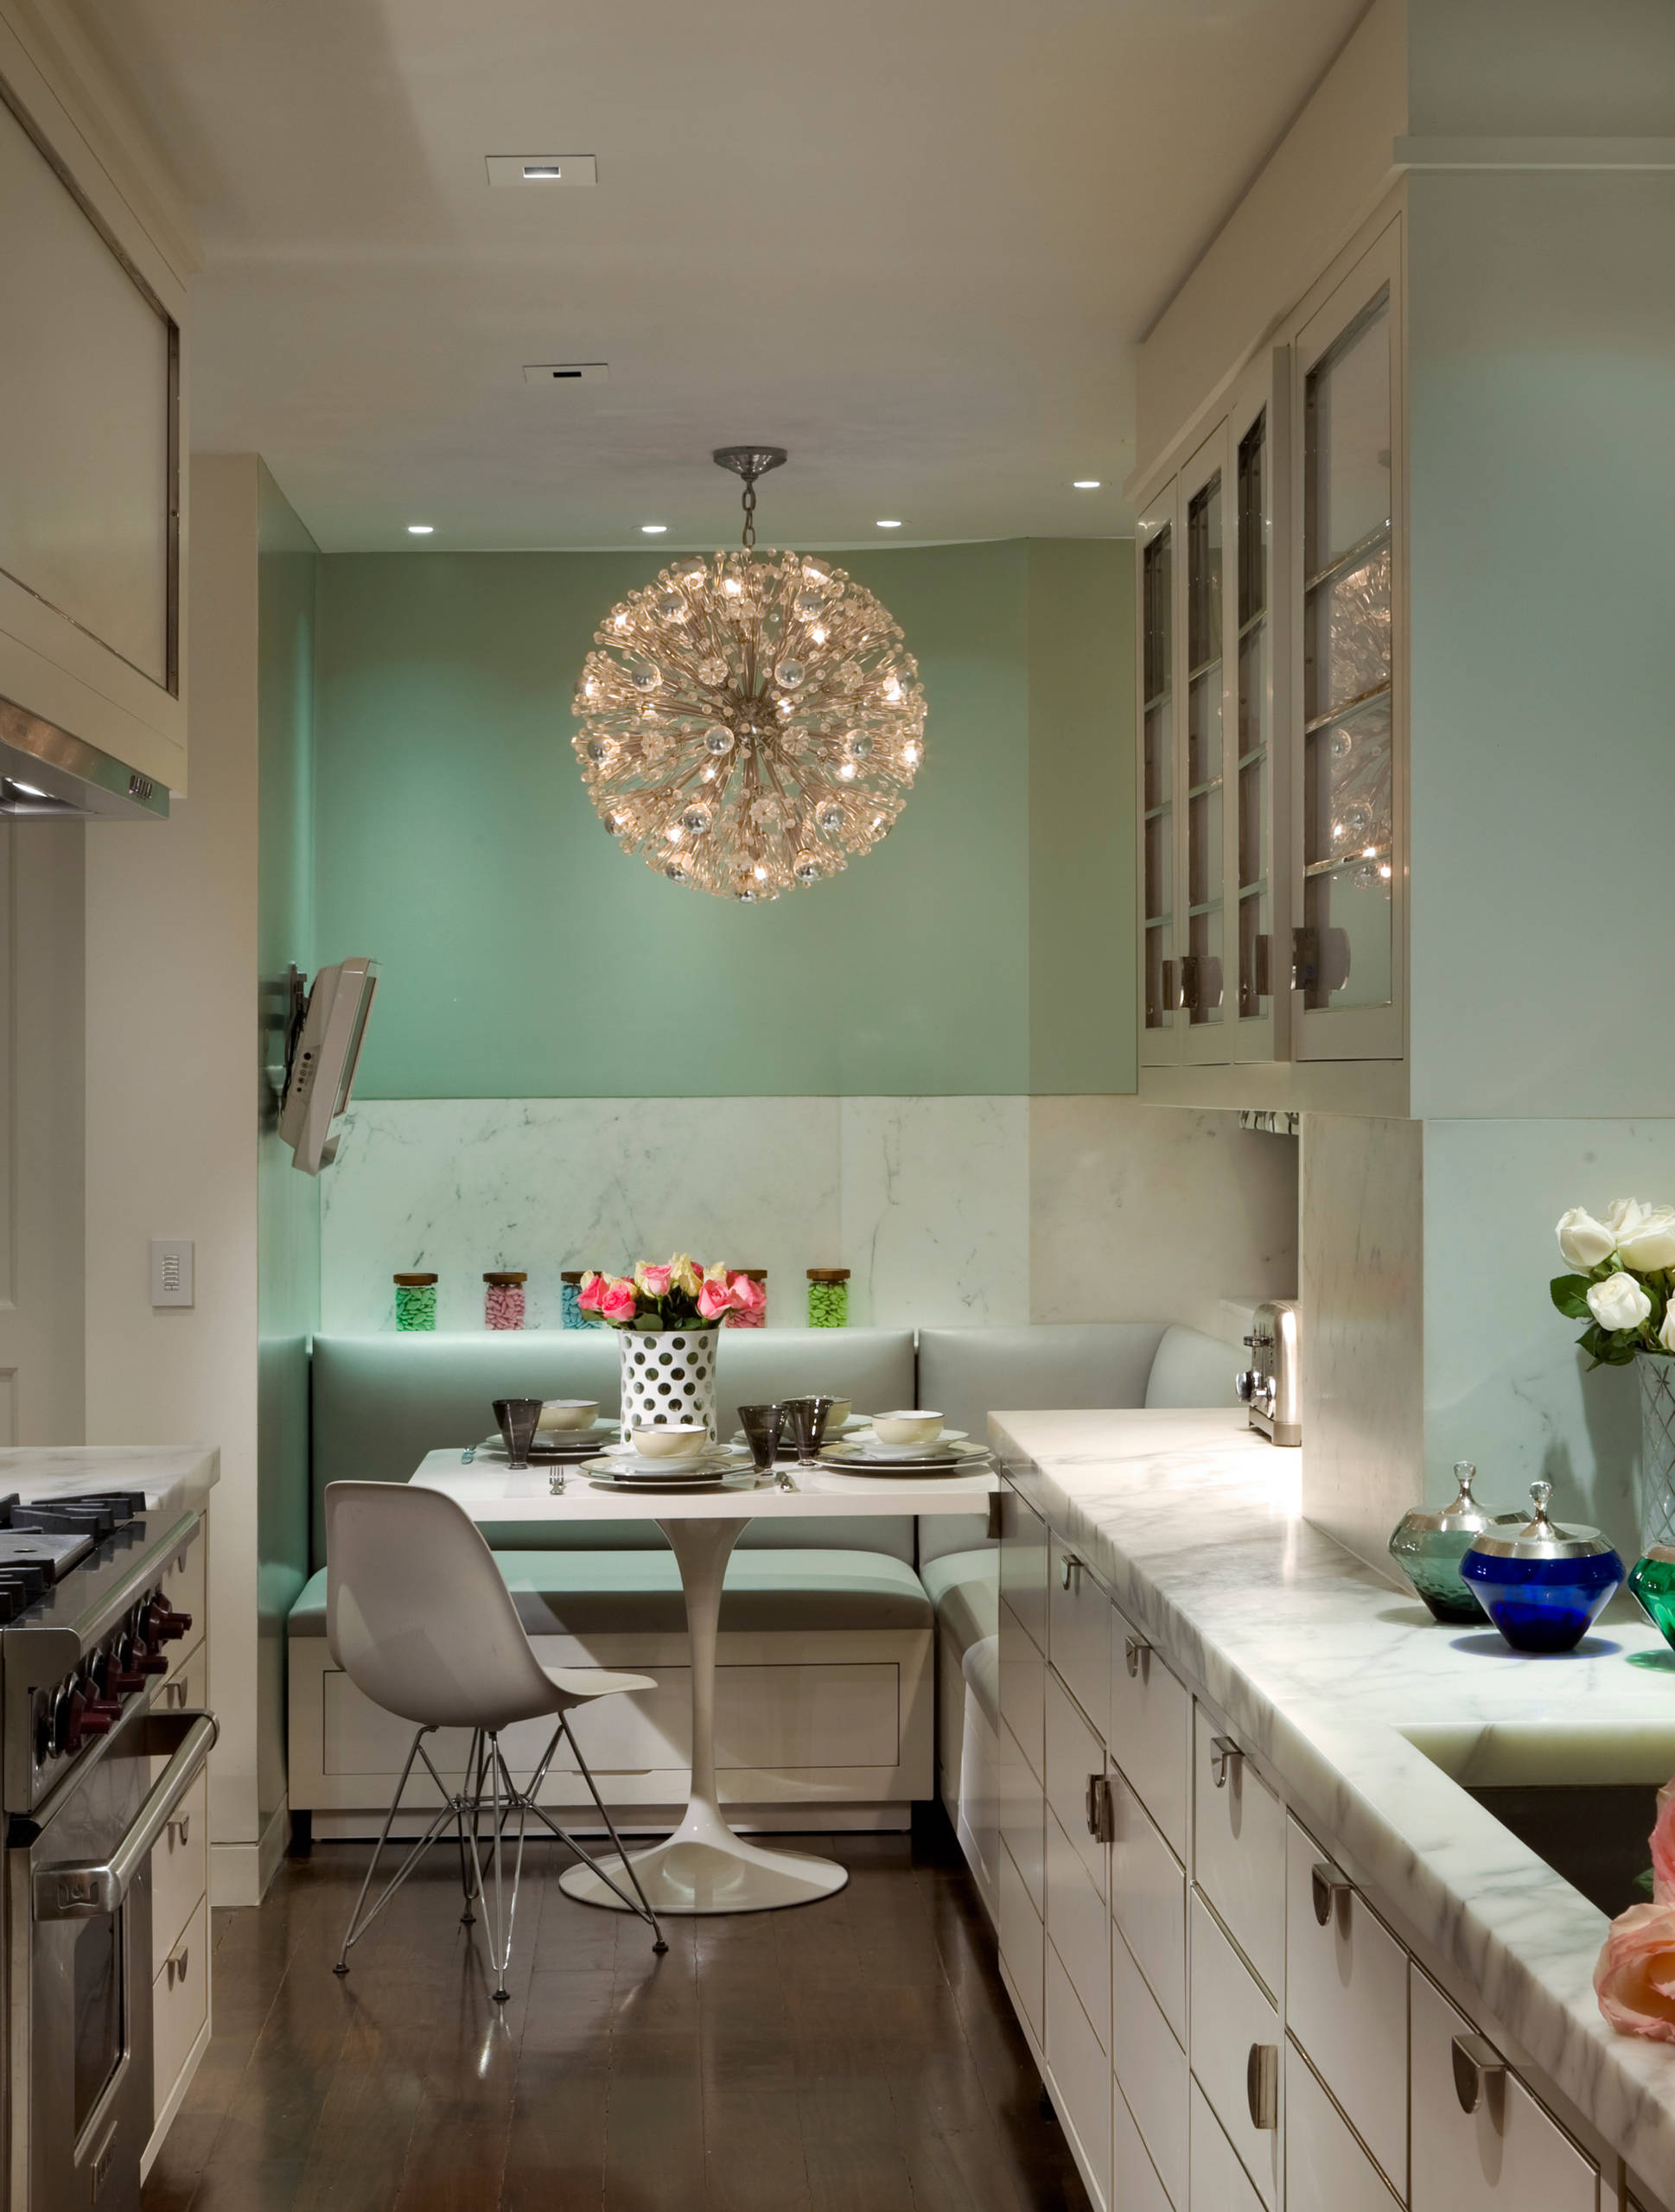 75 Beautiful Small Galley Kitchen Pictures Ideas March 2021 Houzz First, this kitchen design subverts the whole accepted galley kitchen notion that the refrigerator must form the back wall. small galley kitchen pictures ideas